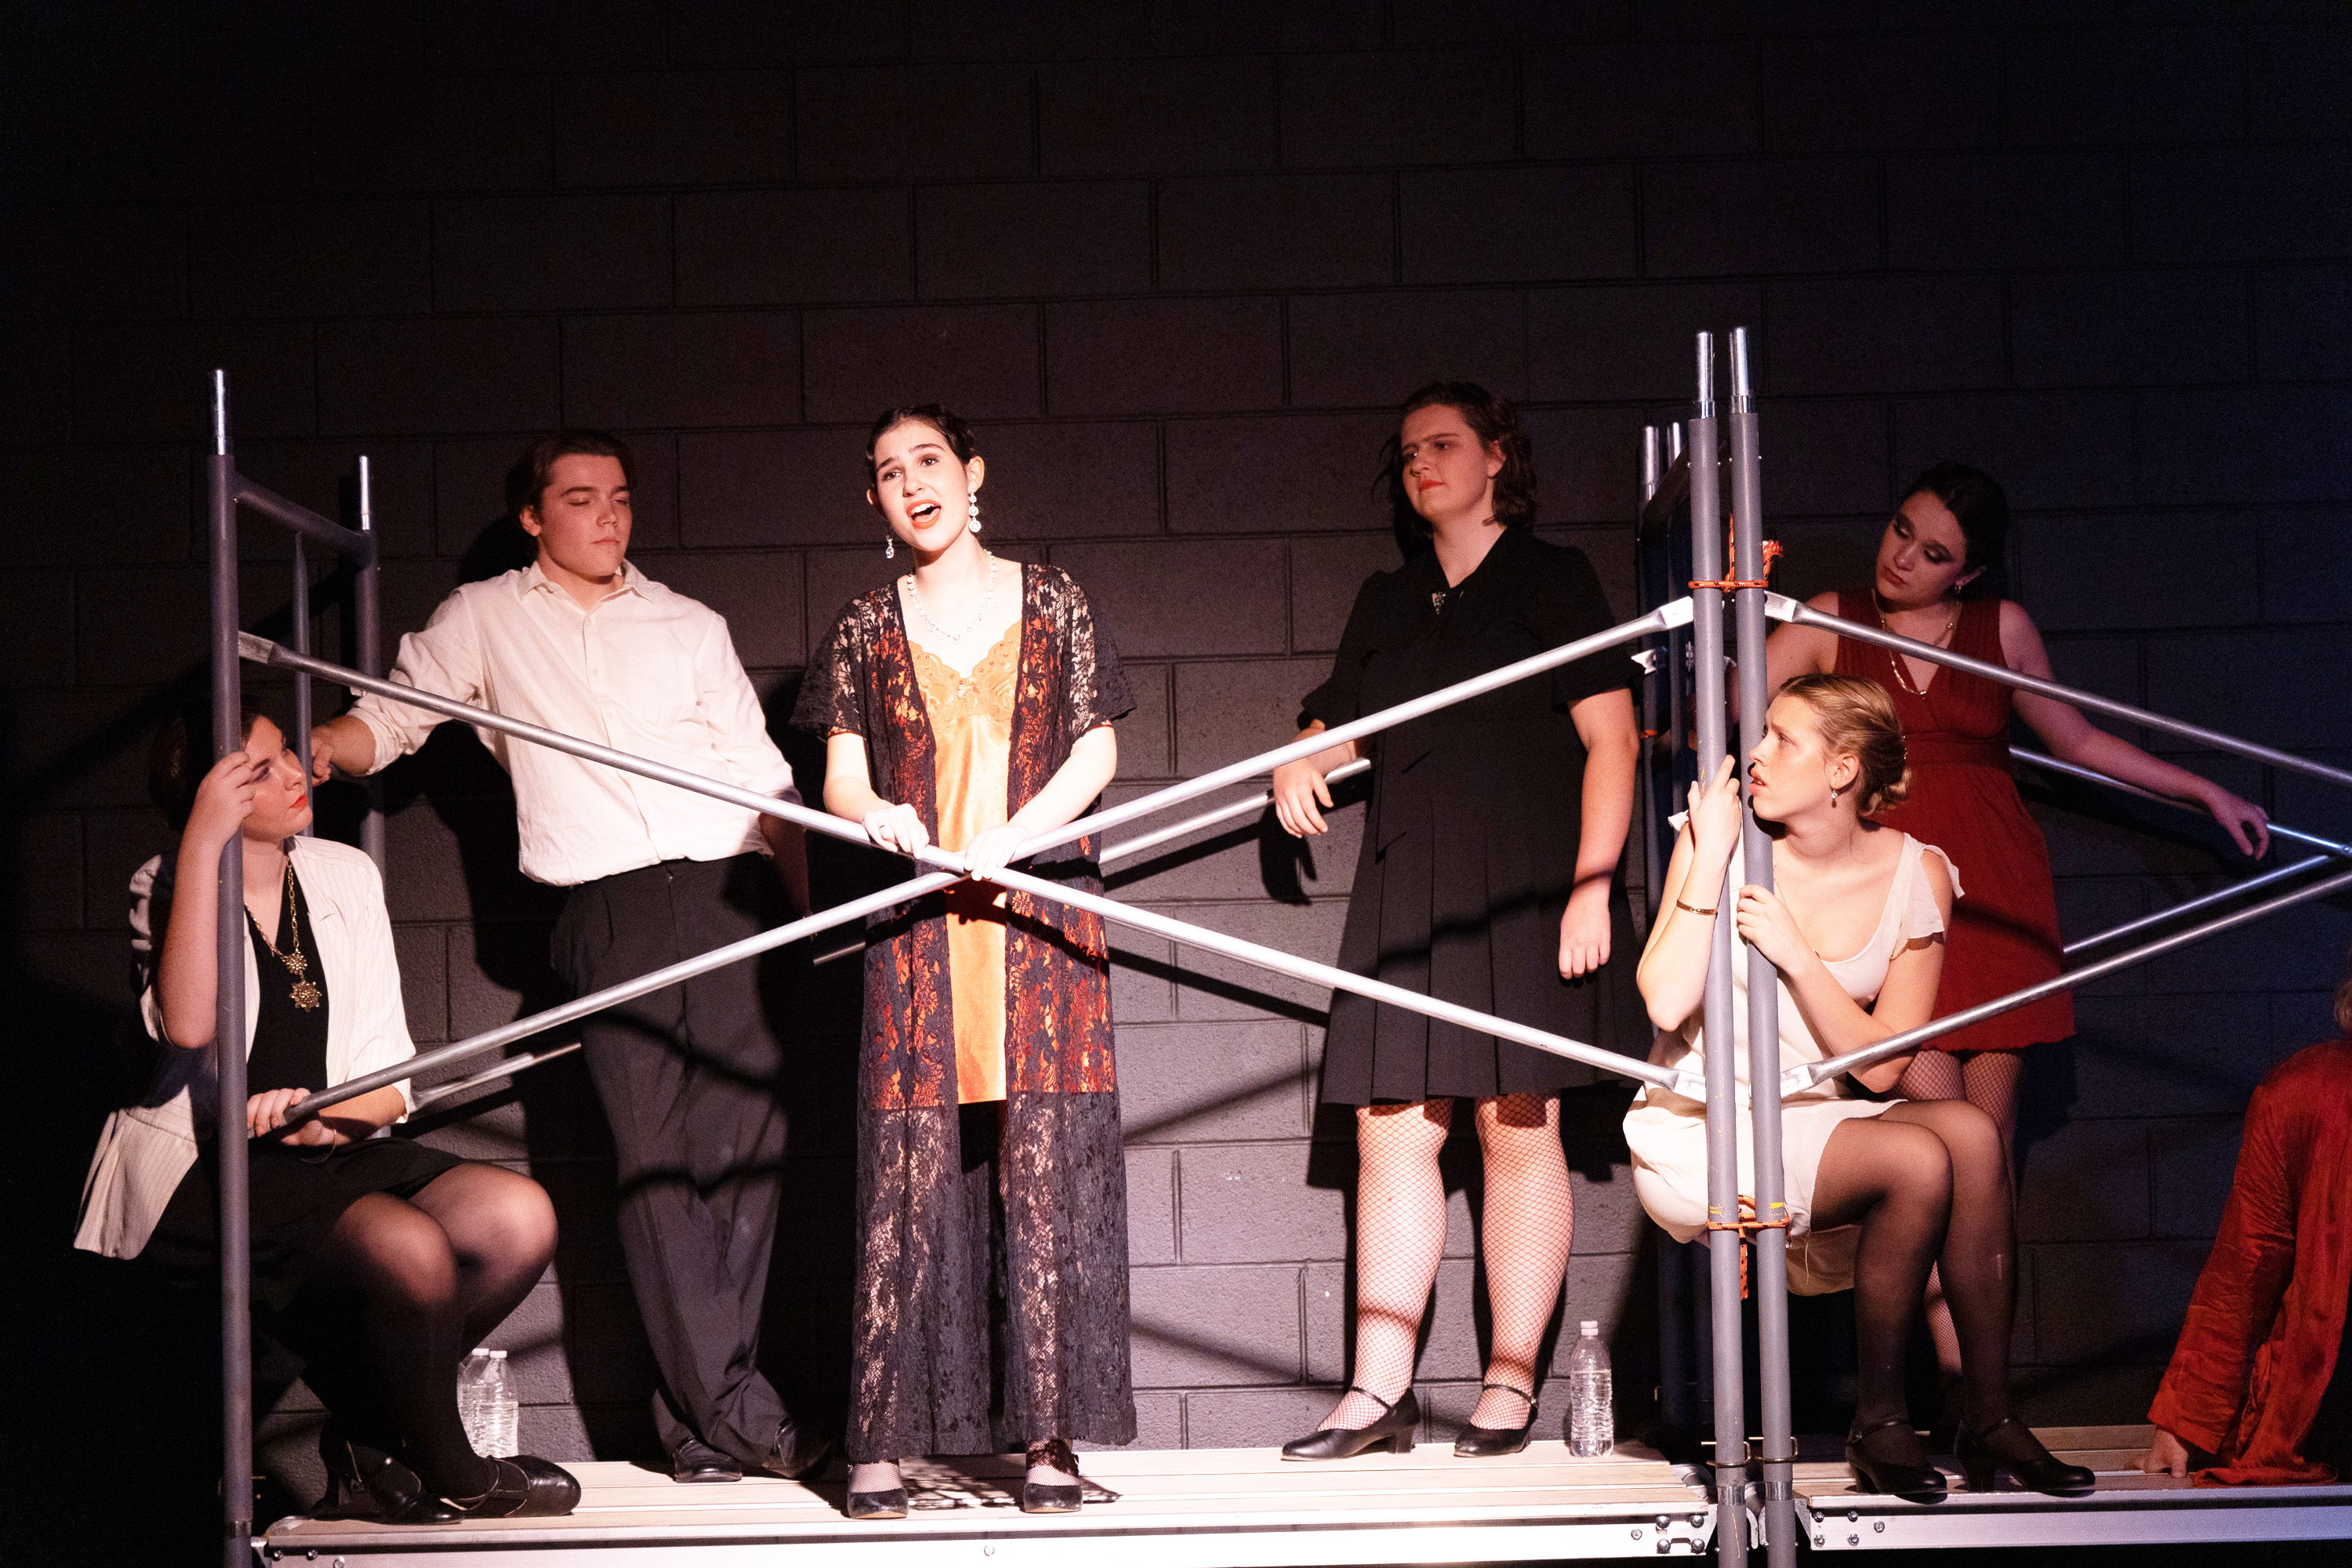 FCHS students perform the musical "Chicago" singing on stage.